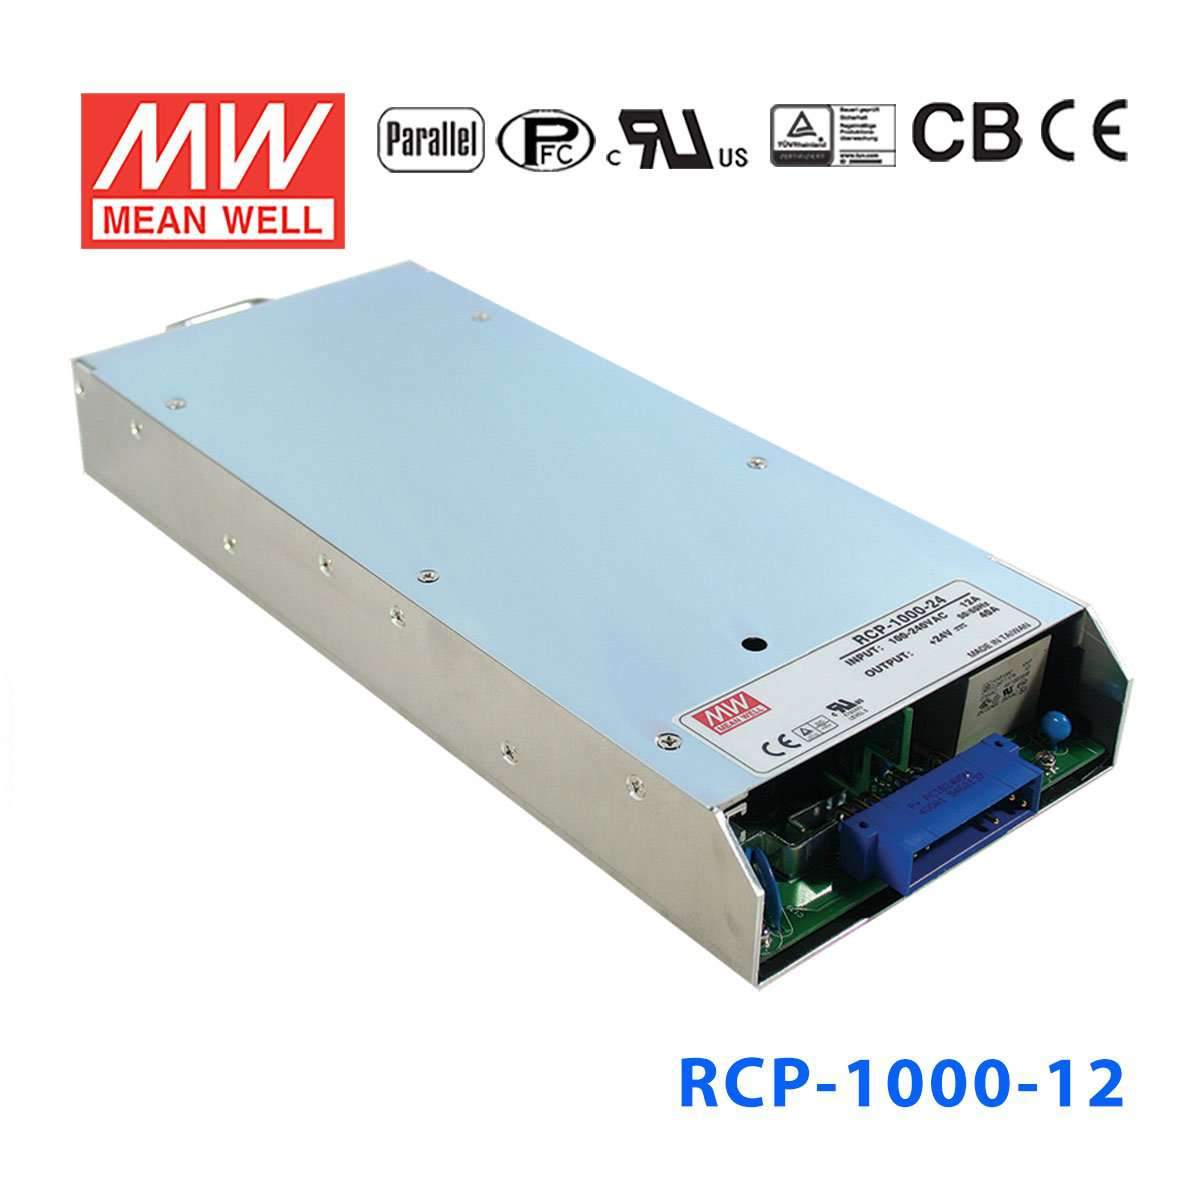 Mean Well RCP-1000-12 power supply 1000W 12V 60A